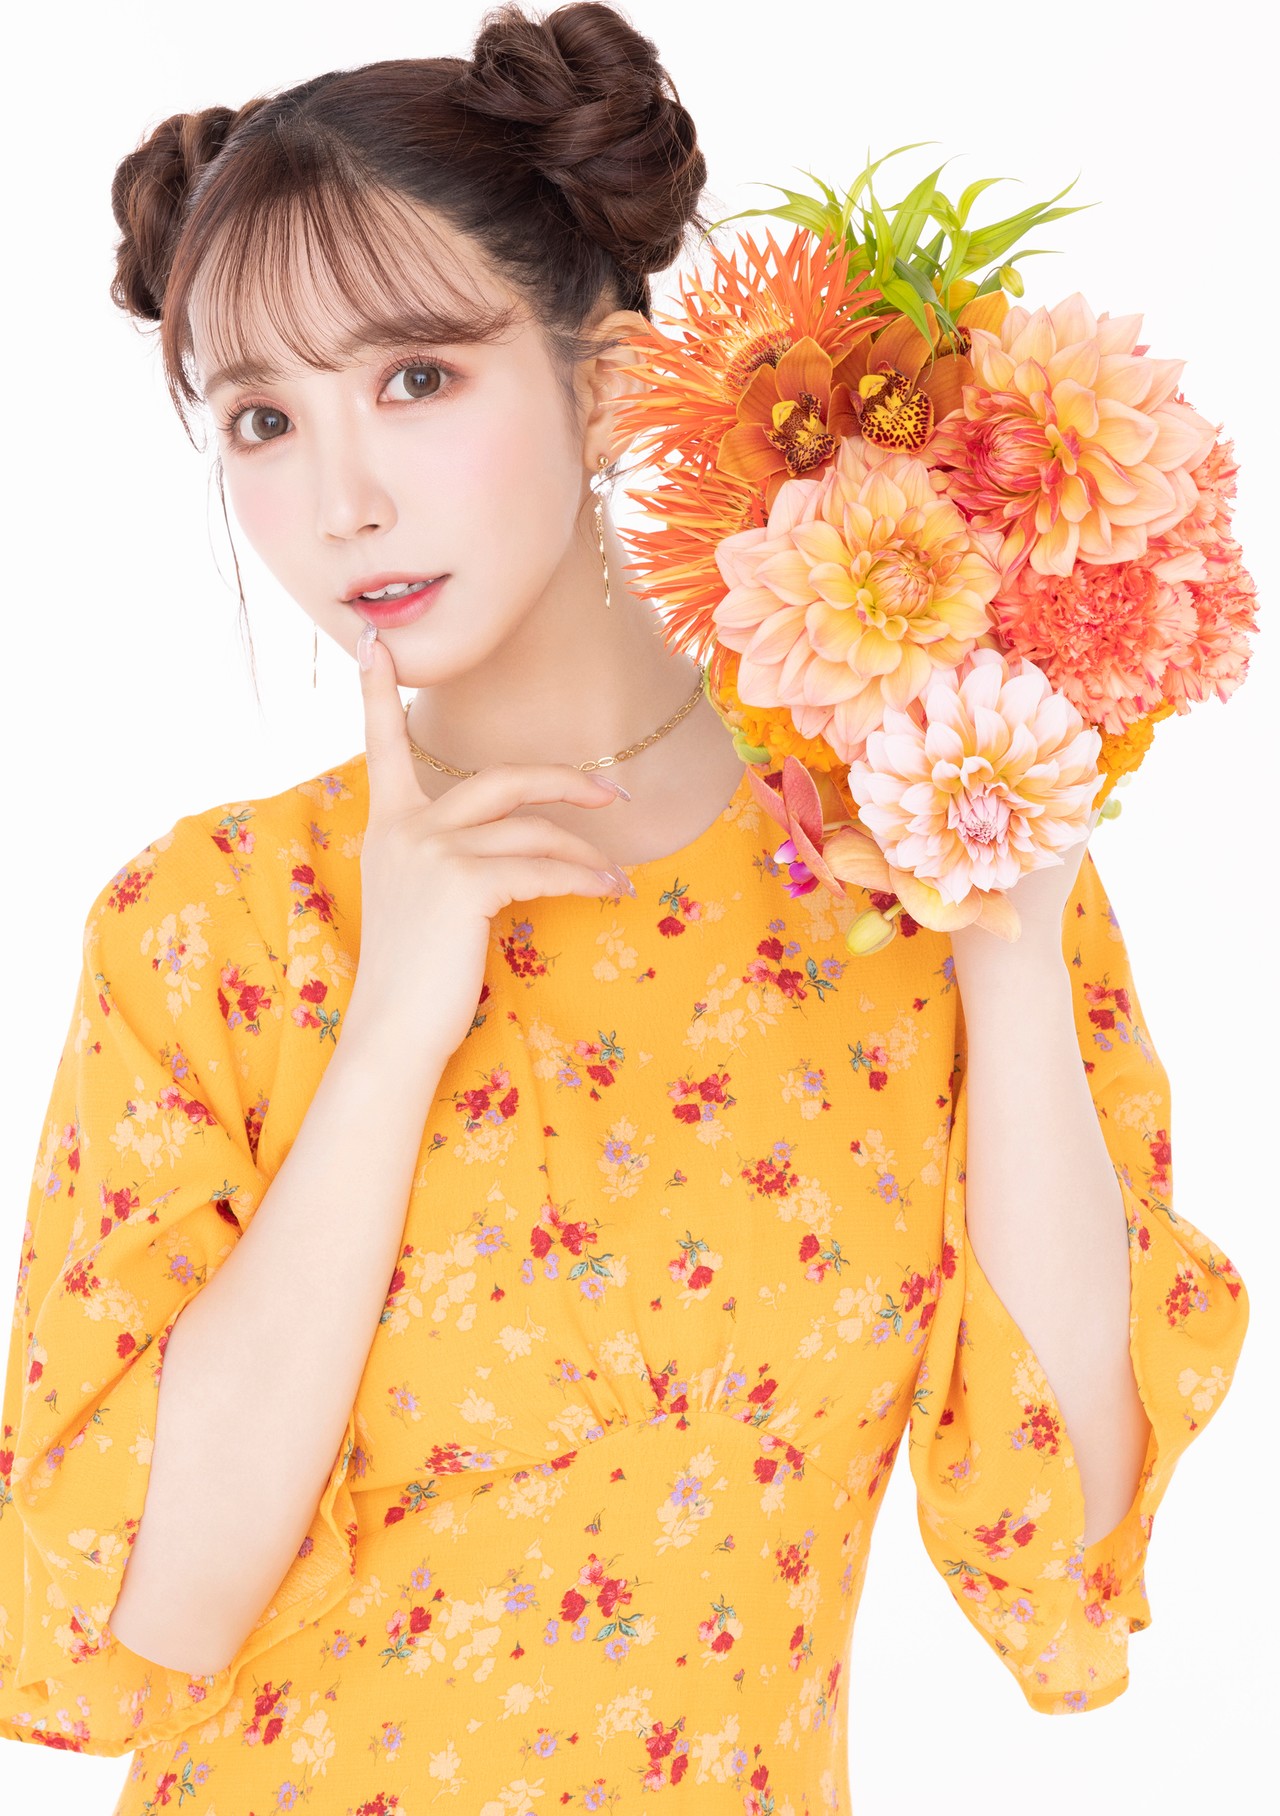 Yua Mikami 三上悠亜, 直筆サイン入りの 「Thank you for everything Mikami Yua Special photo book」 Set.03